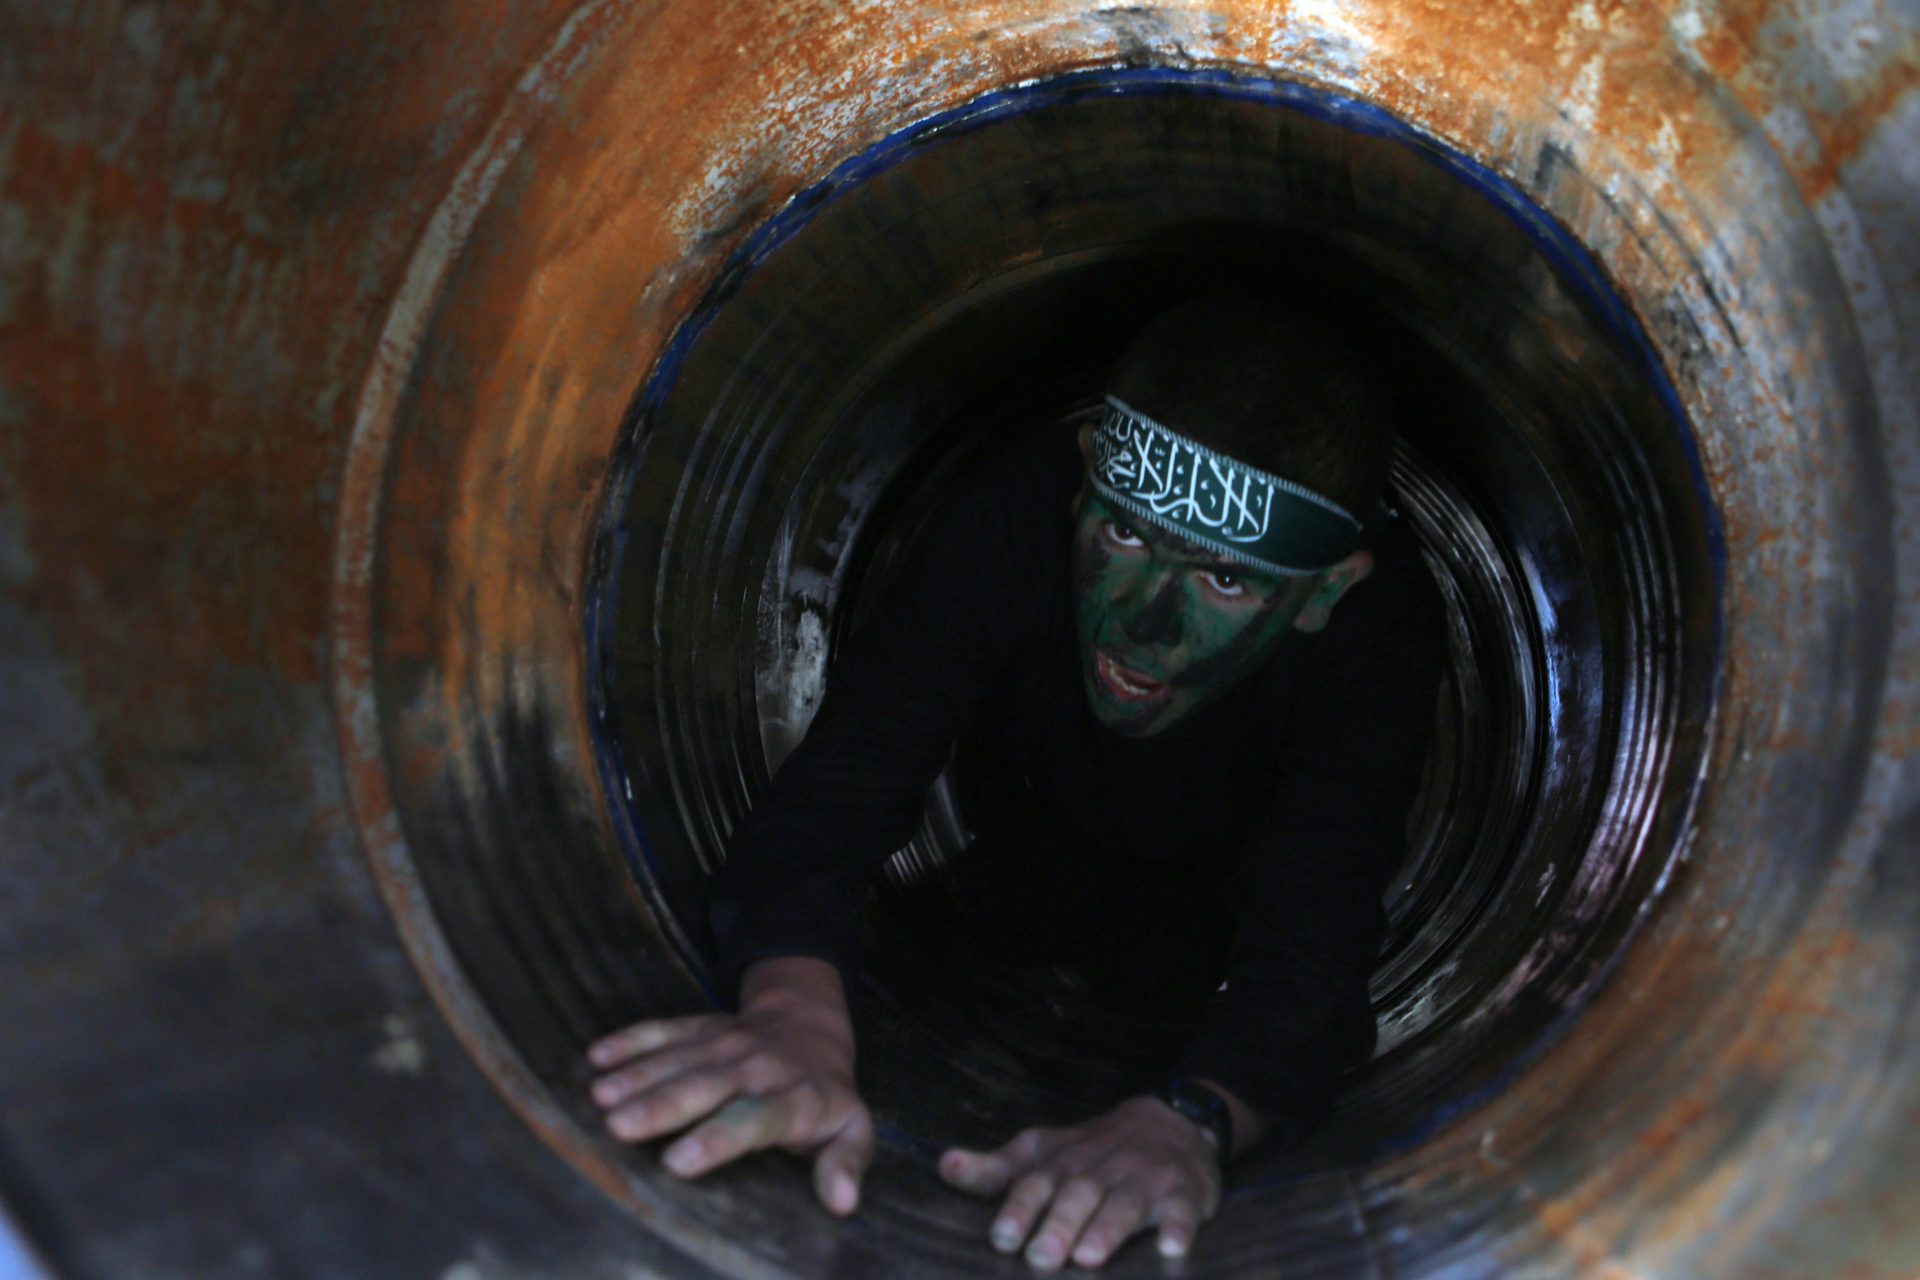 Hamas leaders hide in the tunnels